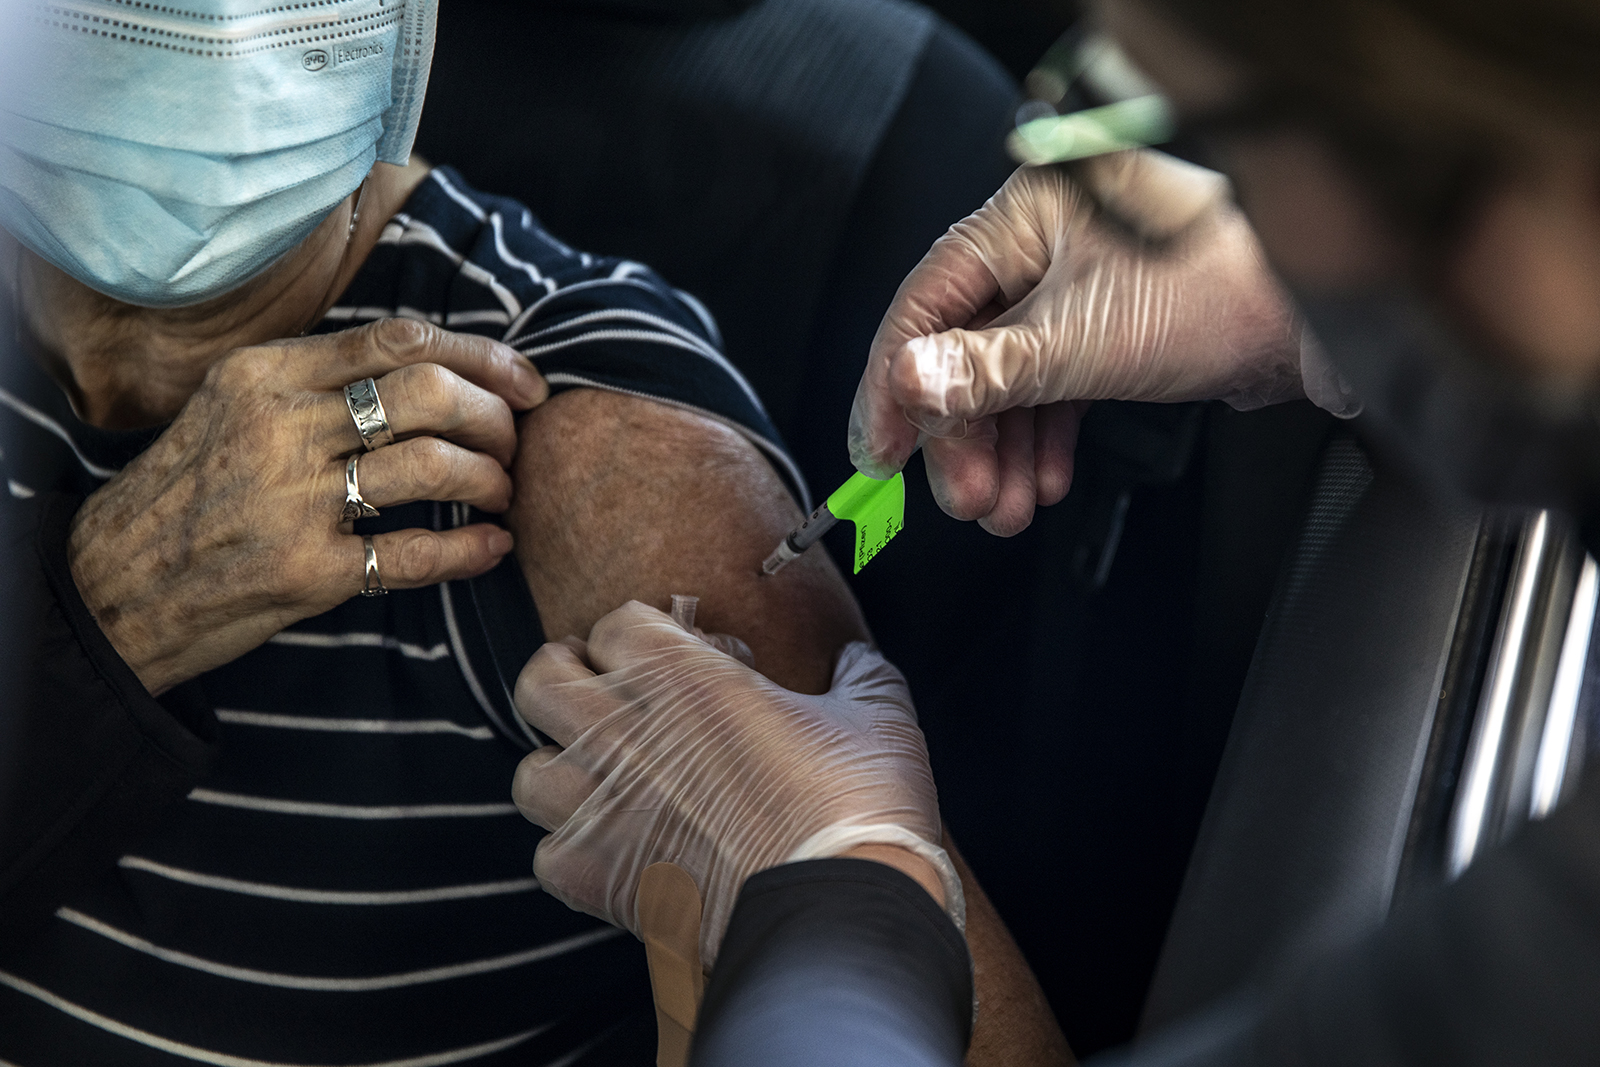 A health care worker administers a dose of the Pfizer-BioNTech Covid-19 vaccine at Coors Field in Denver, Colorado, on February 20.